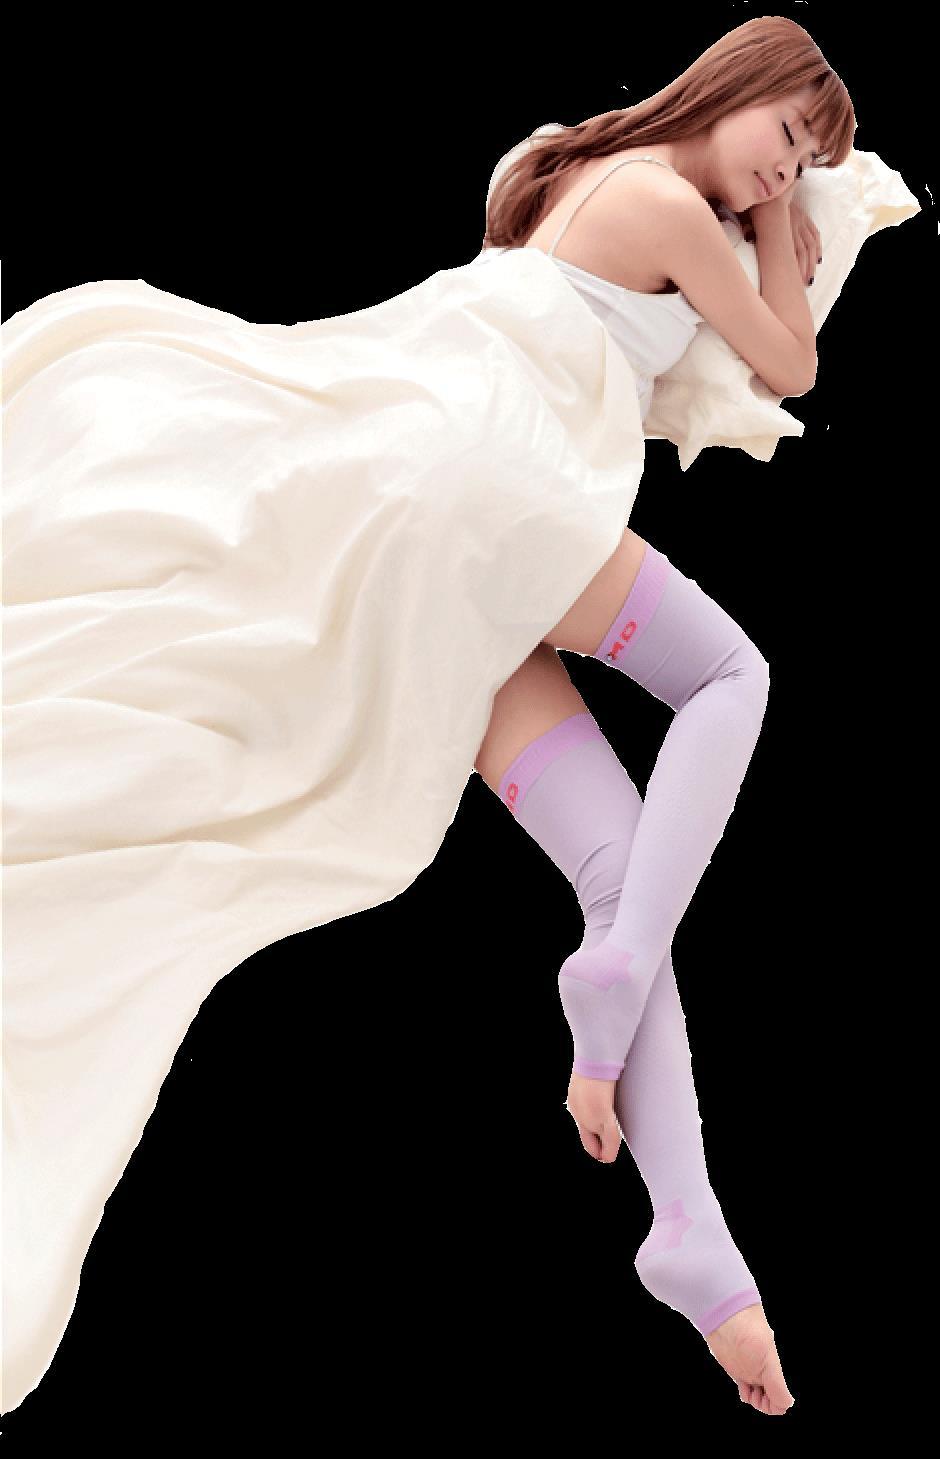 Sleep Socks Compression Stockings without the